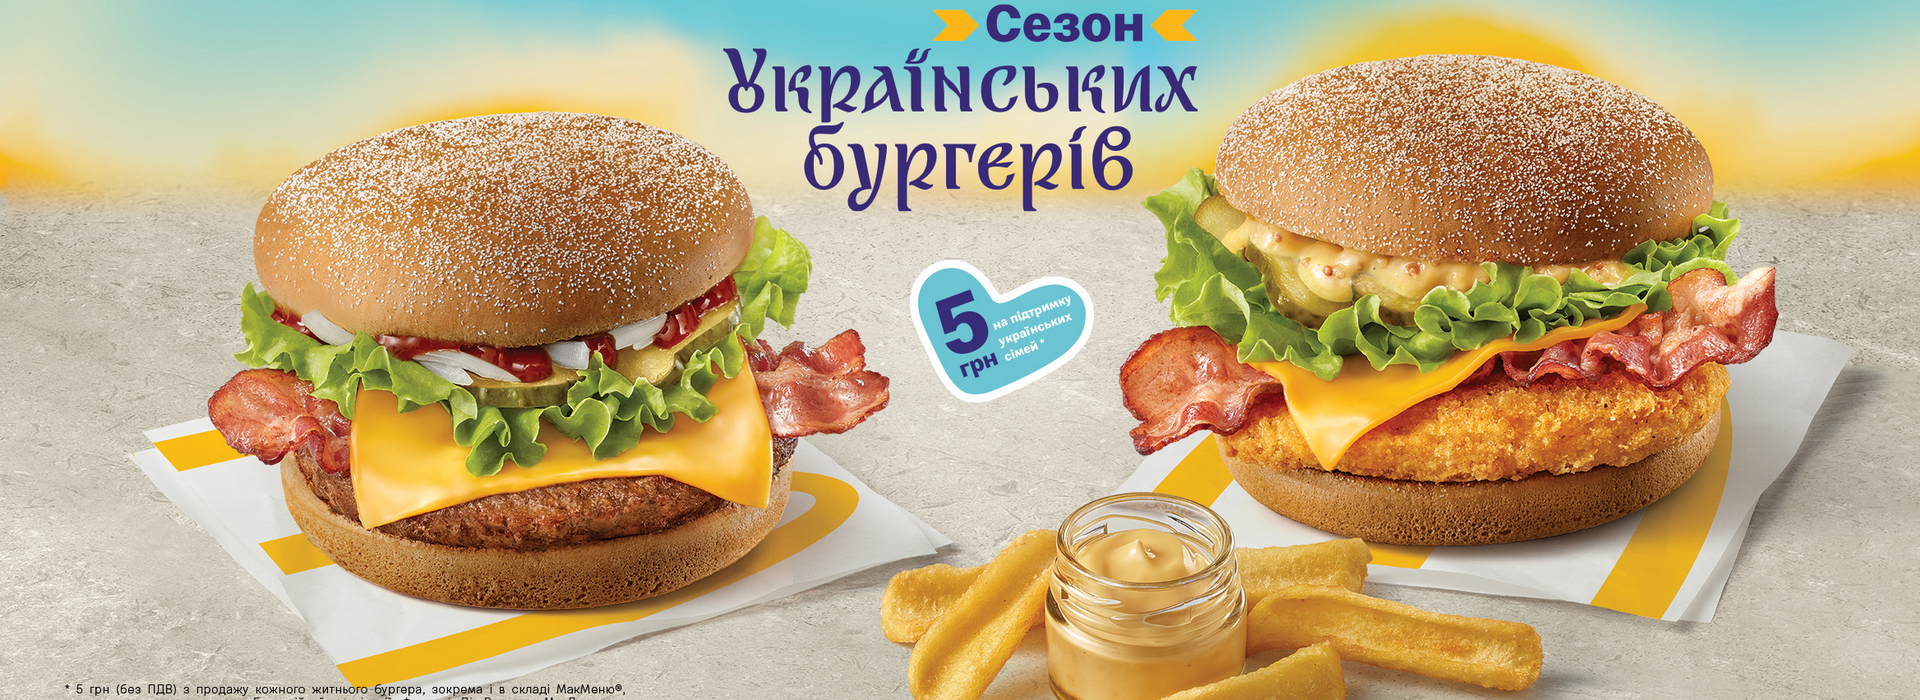 Season of Ukrainian Burgers at McDonald’s: Favorite Flavors and Help for Those Around You